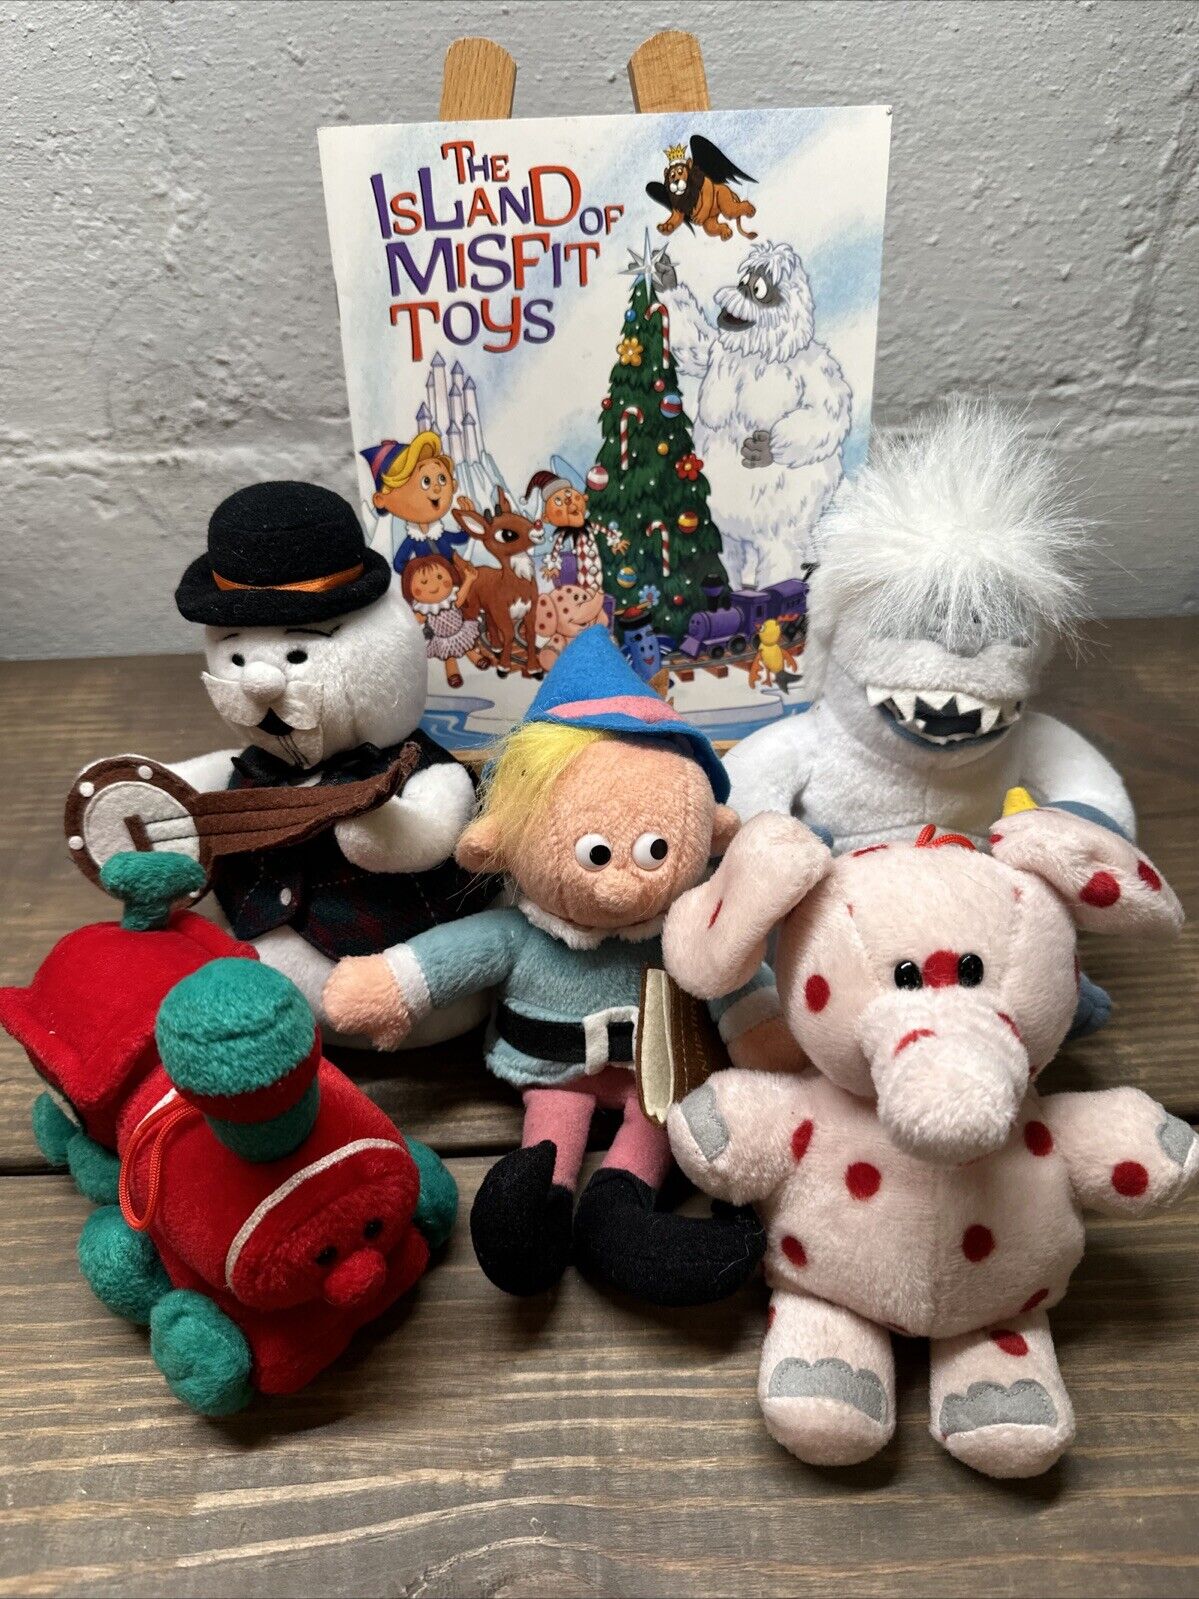 Vintage The Island Of Misfit Toys Book & Plush Lot of 5 Stuffins Toys Christmas